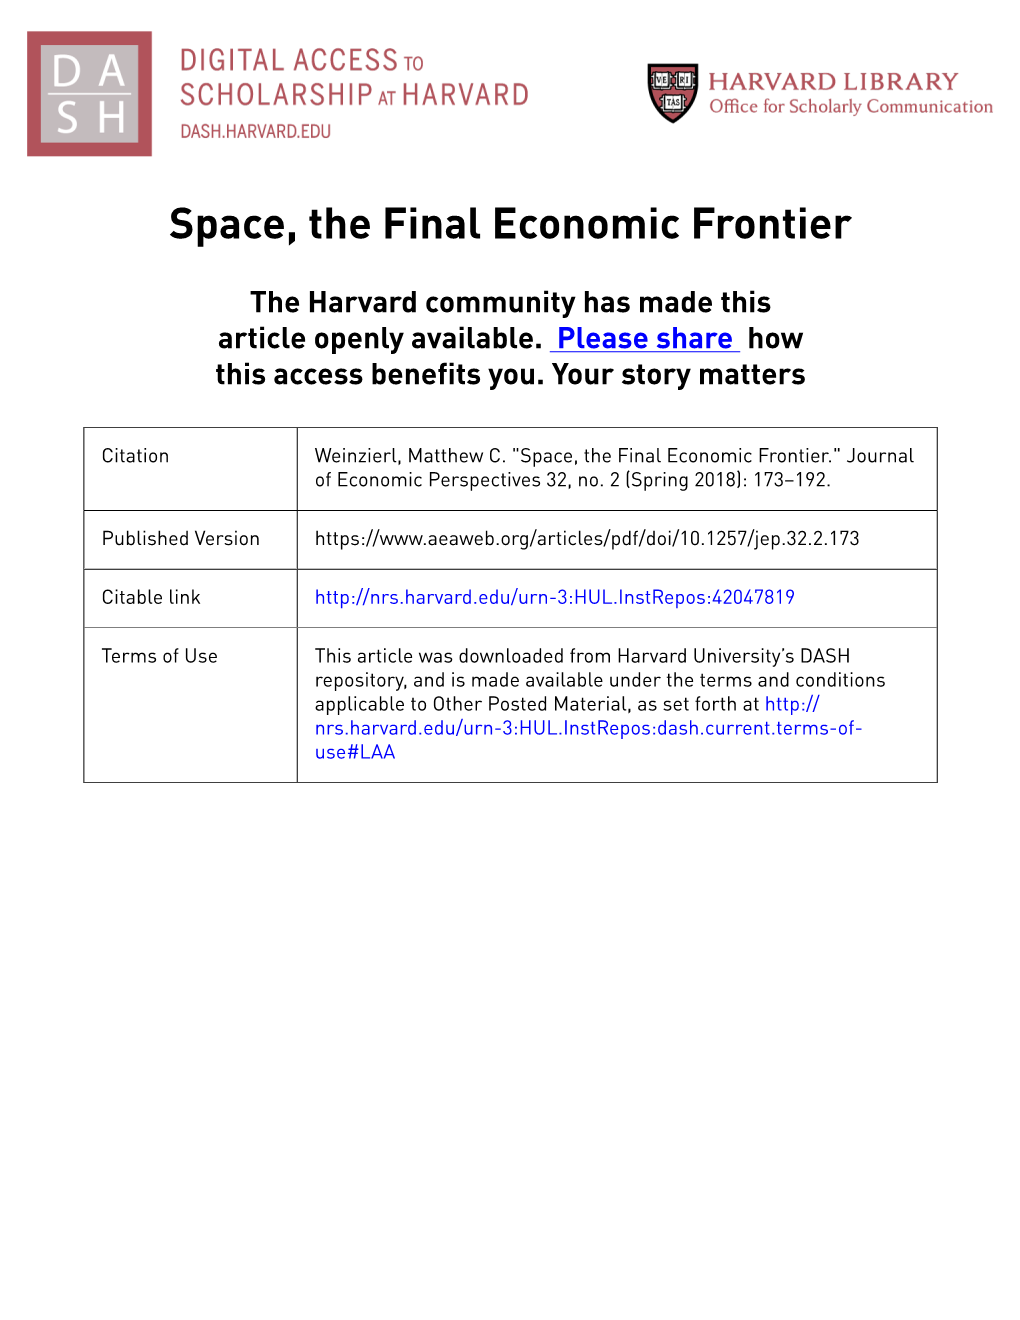 Space, the Final Economic Frontier